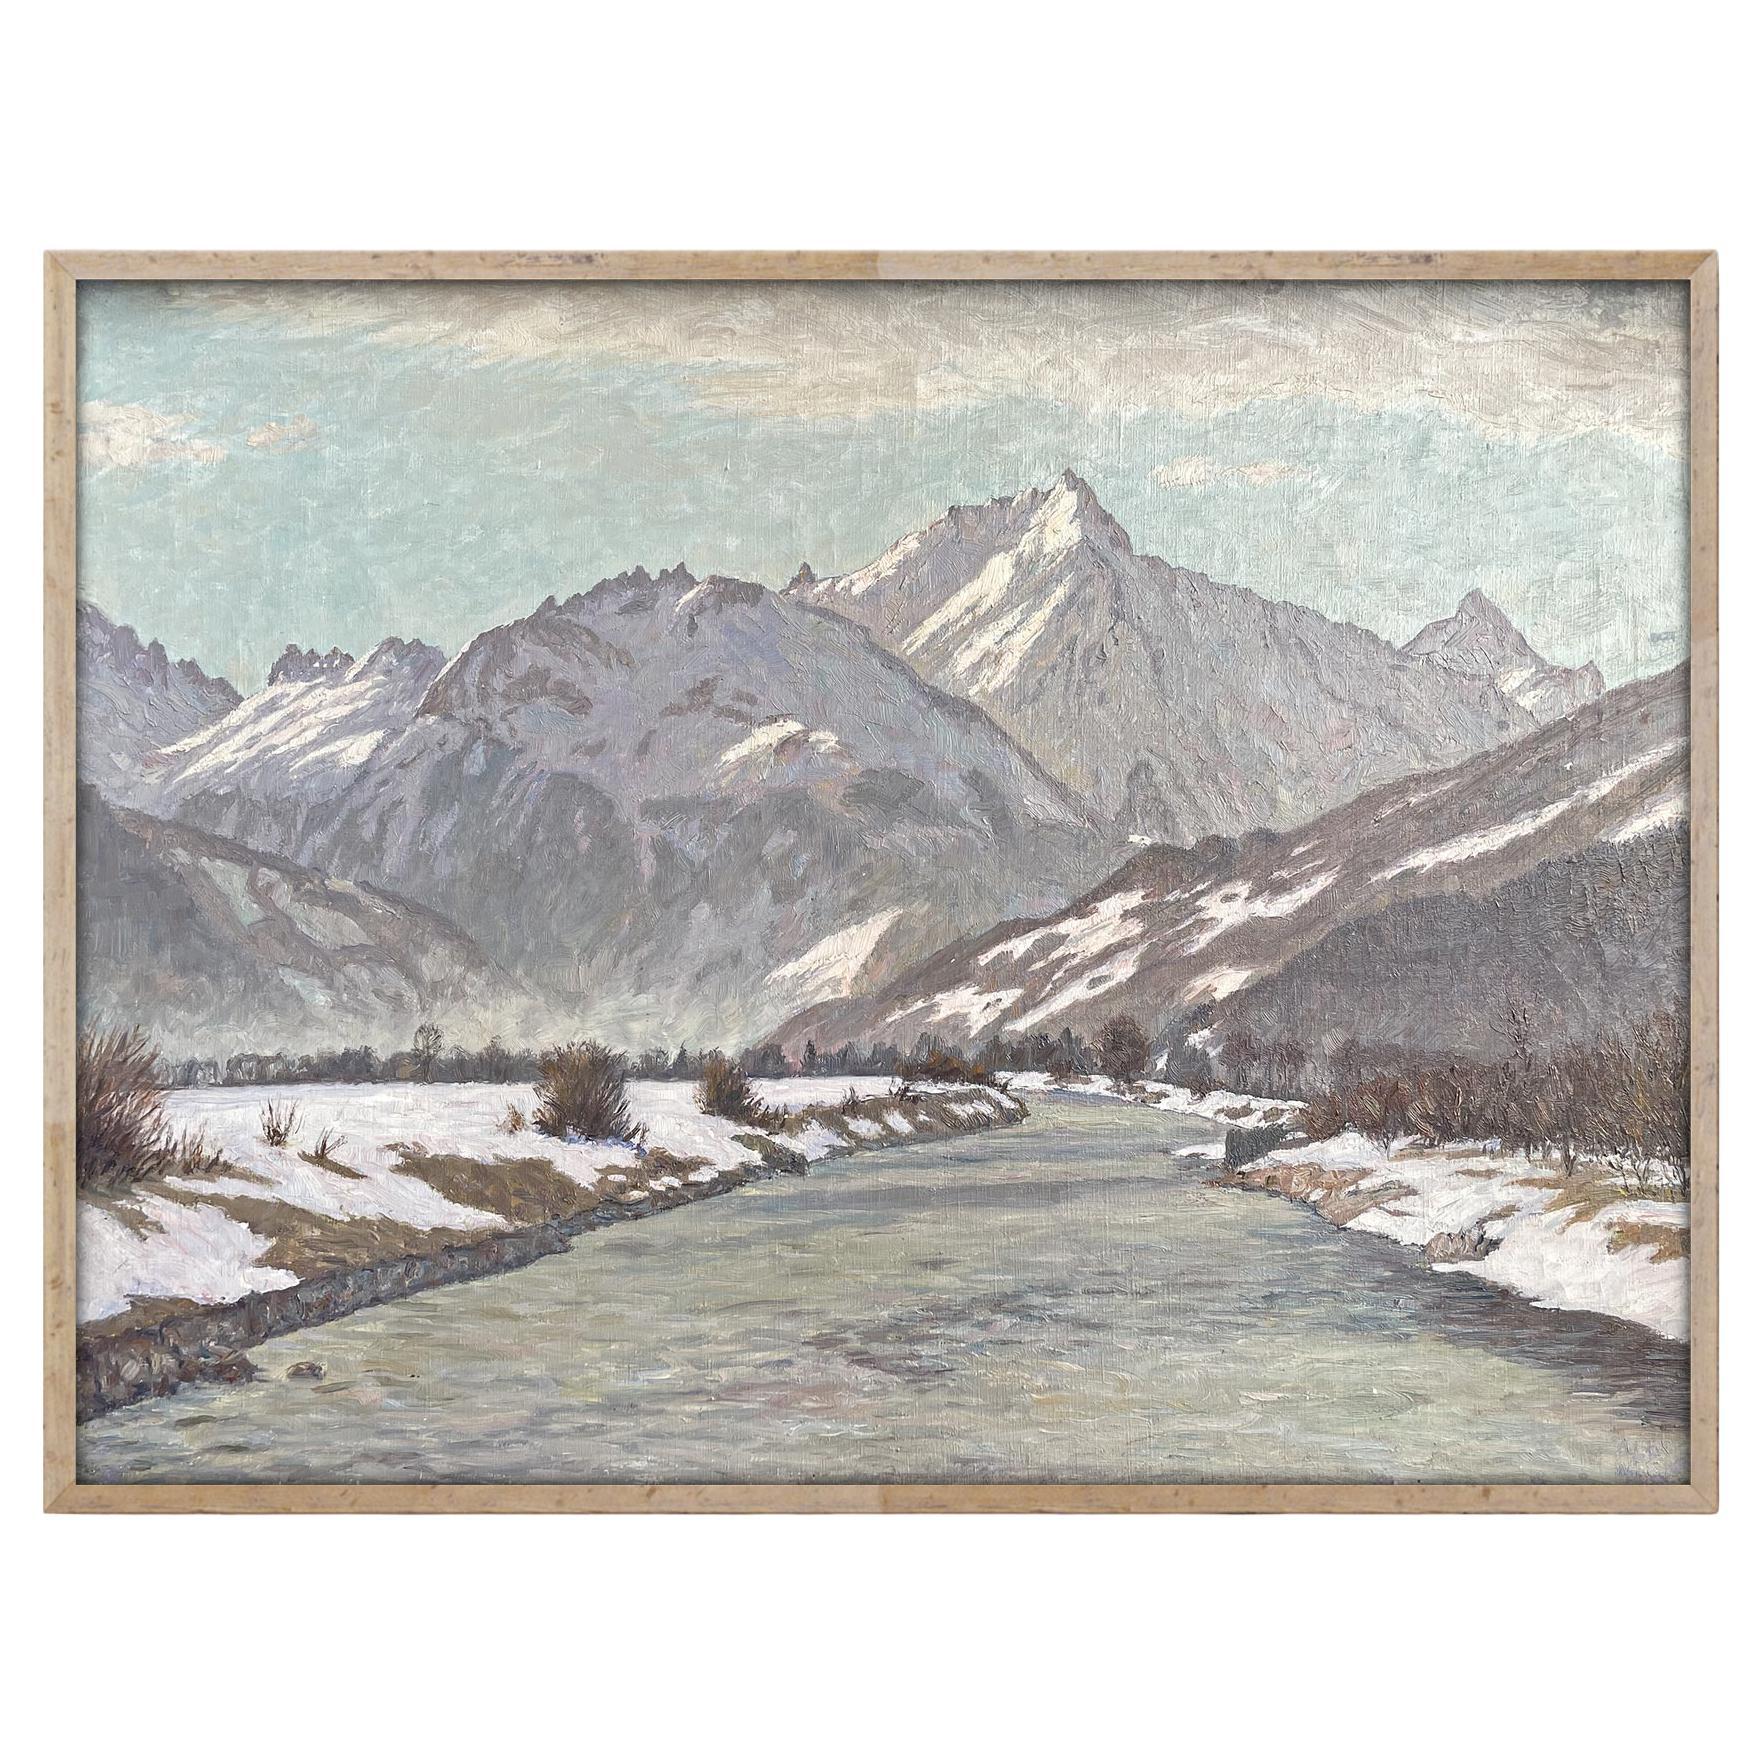 Snowy Landscape Oil On Canvas by Alex Weise - Dolomites 1930 For Sale